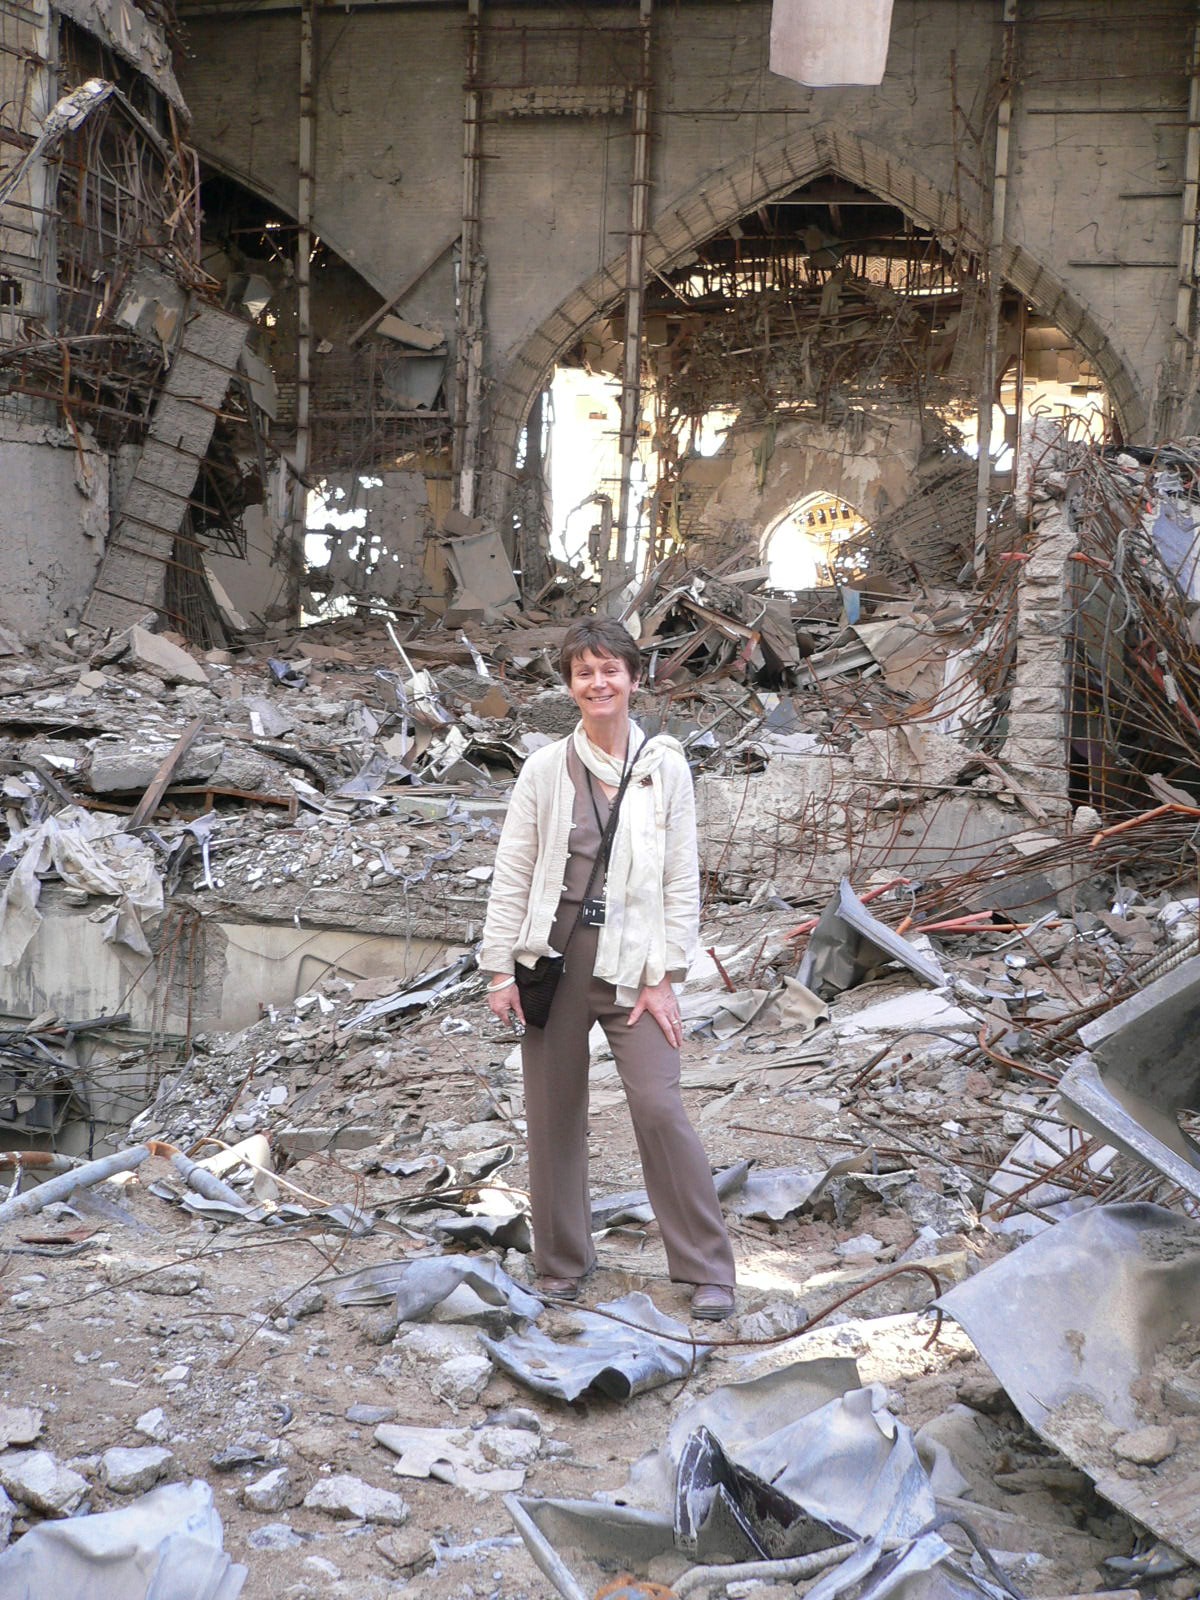 Bomb damage of the palace above Saddam Hussein's nuclear bunker